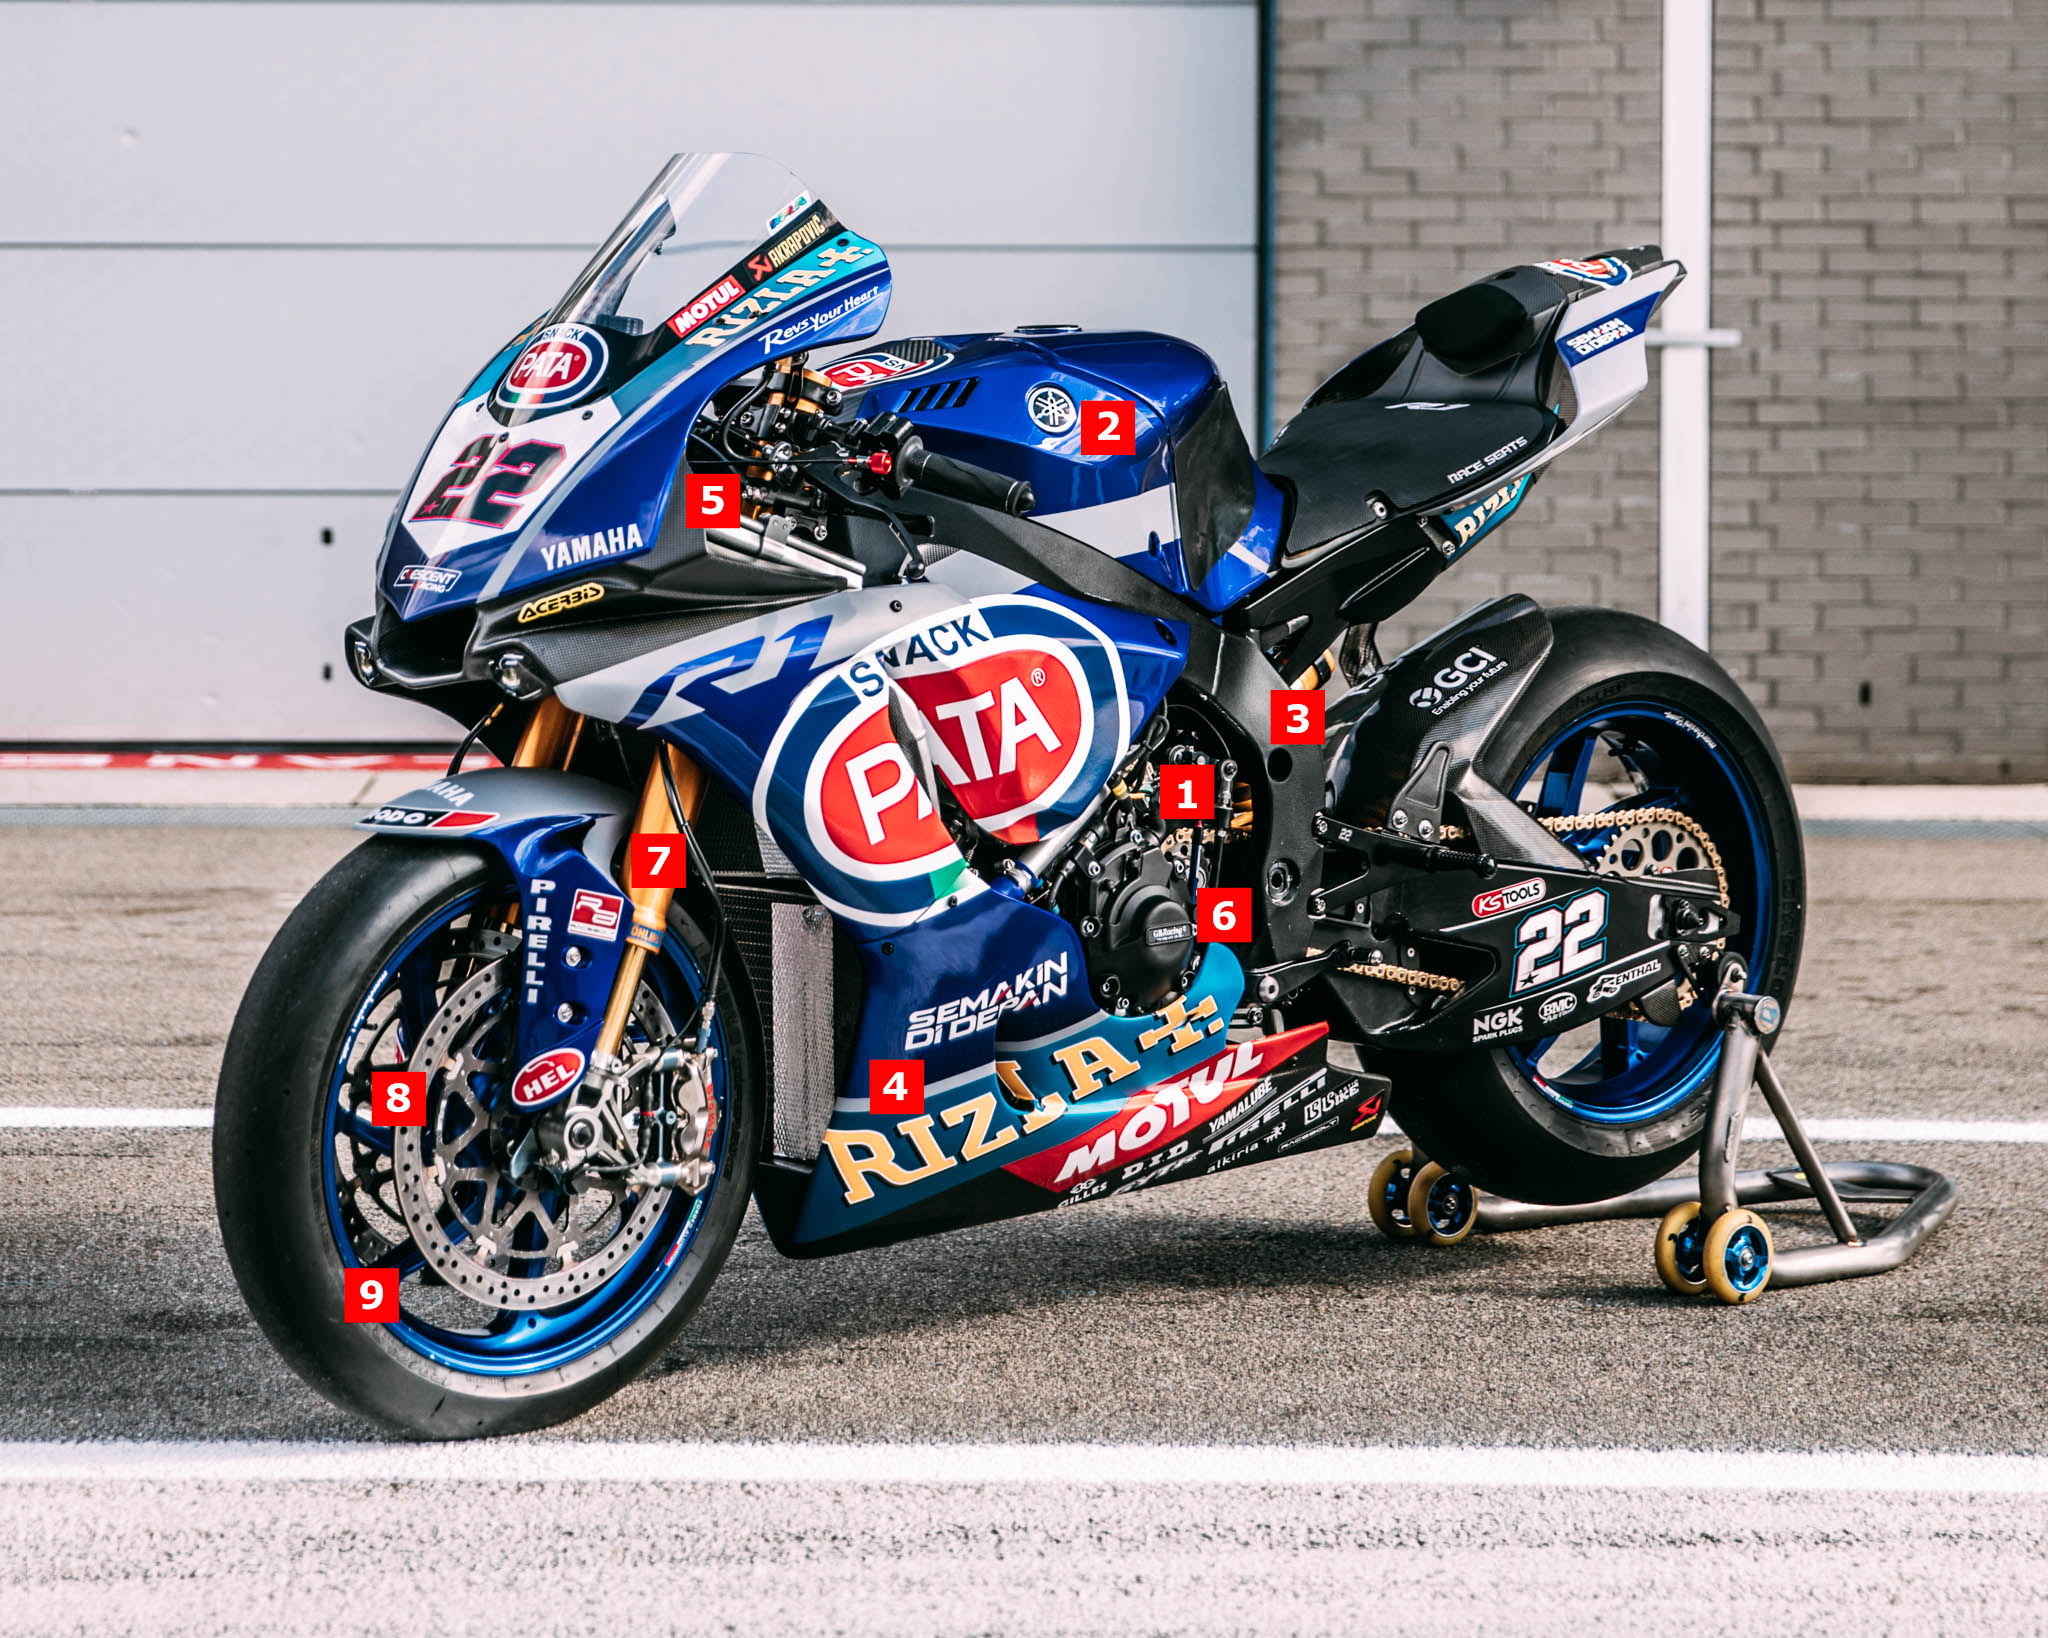 THE ANATOMY OF THE PATA YAMAHY YZF-R1: A CLOSER LOOK INTO THE